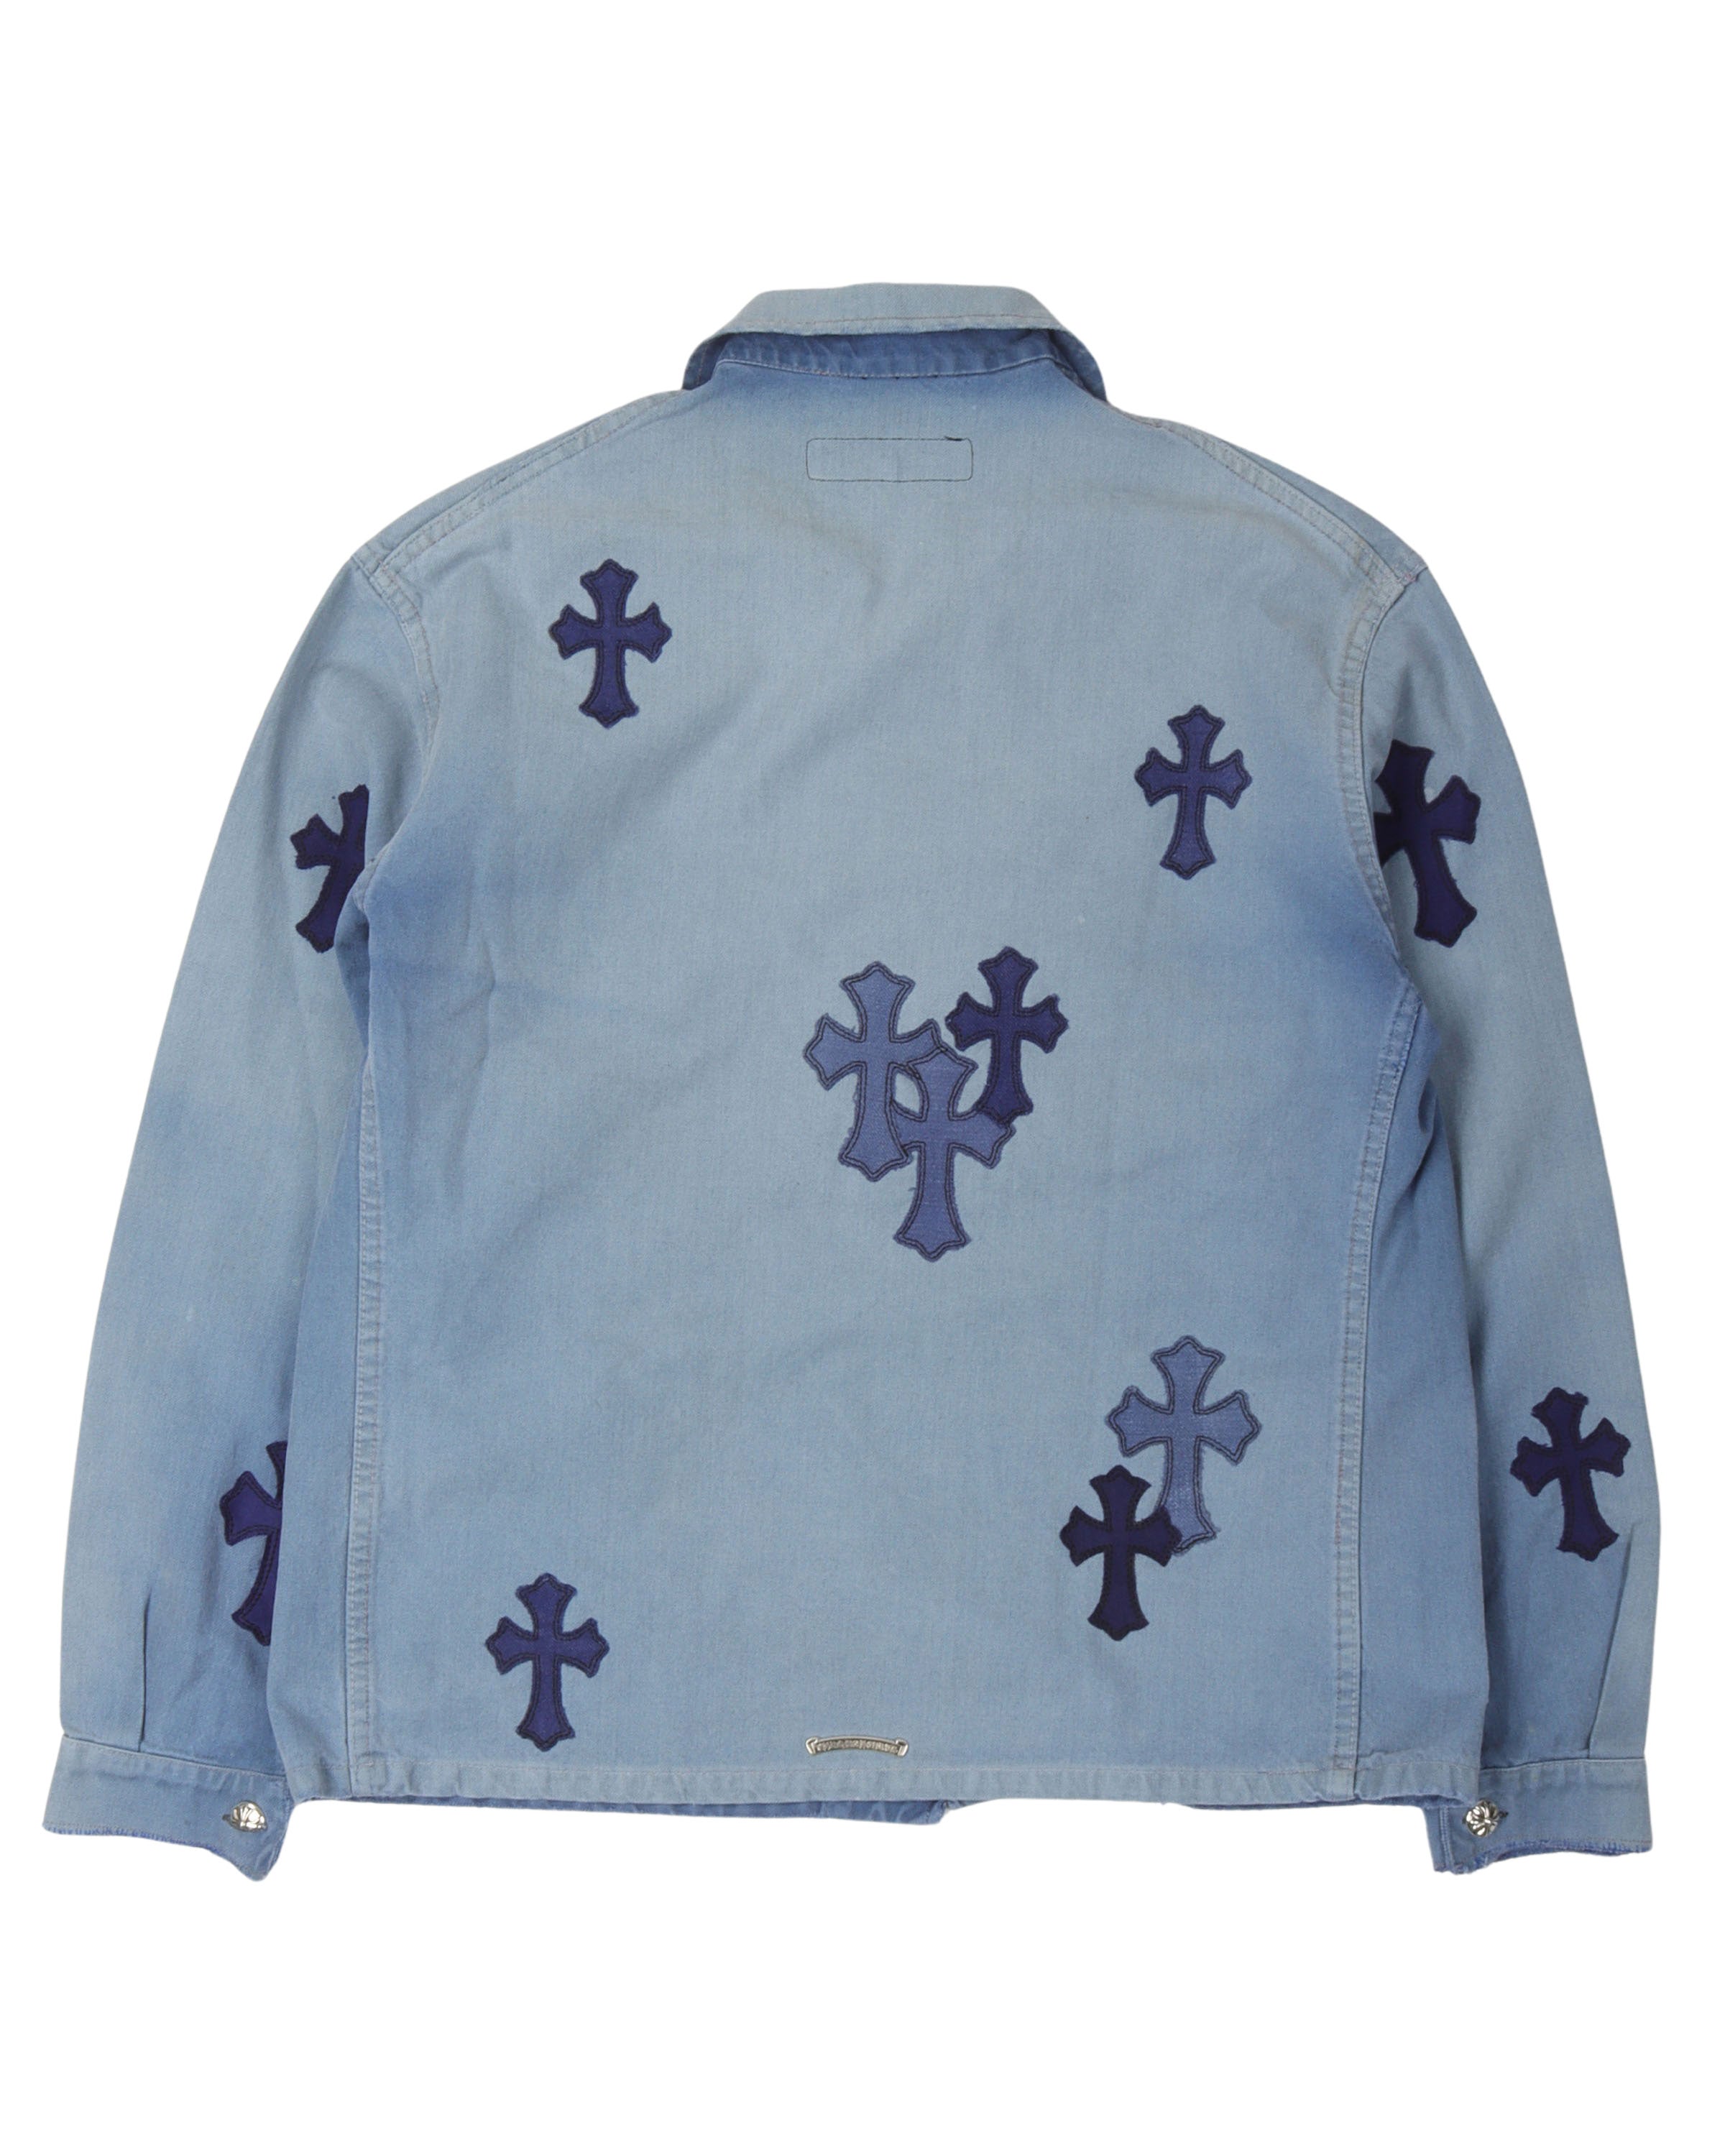 Cross Patch French Work Shirt